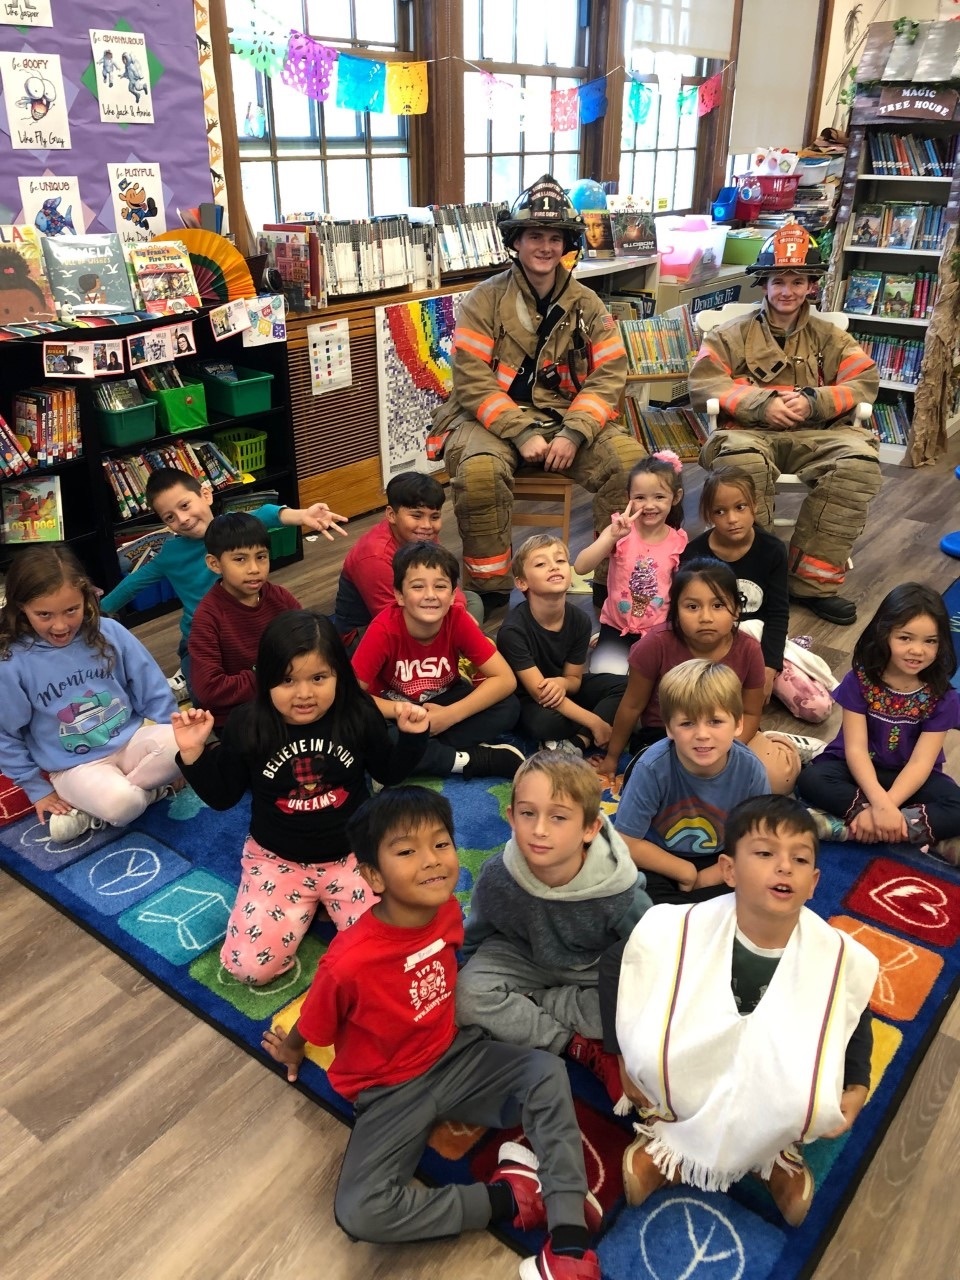 Southampton firefighters Nicholas Maddock and Jagger Maddock were guest readers in the school’s library on October 14. They read “Curious George and the Firefighters” by H.A Ray to the first graders. COURTESY SOUTHAMPTON SCHOOL DISTRICT